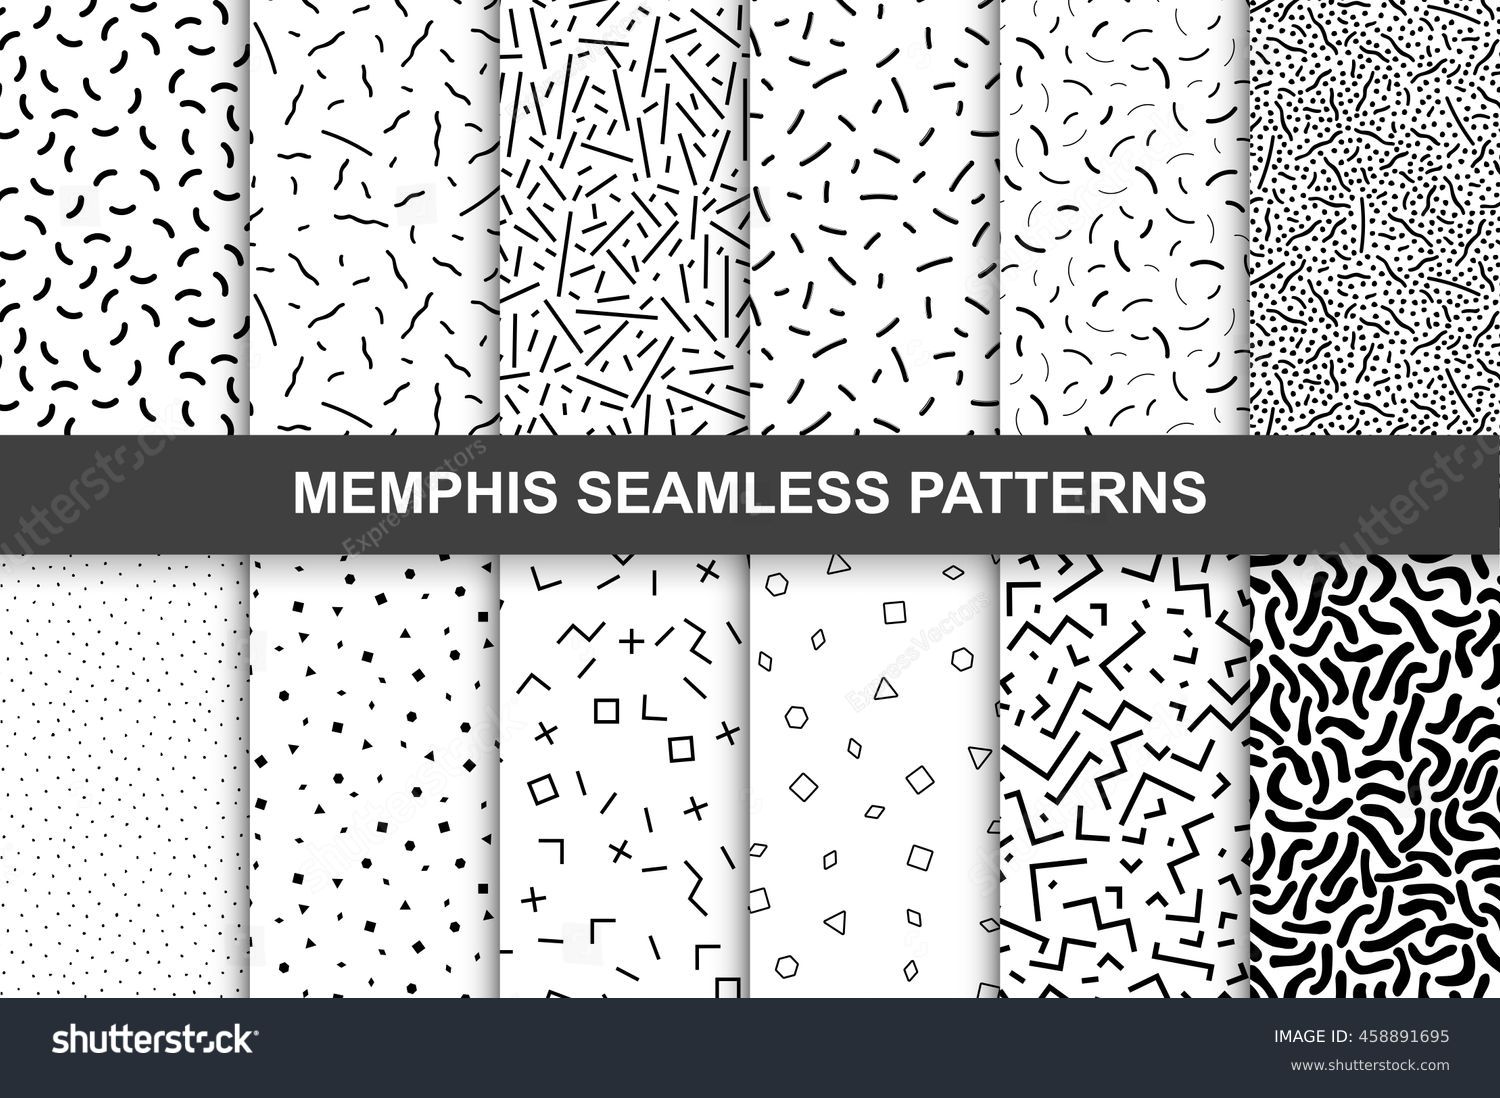 Collection of swatches memphis patterns - seamless. Fashion 80-90s. Black and white mosaic textures. #458891695